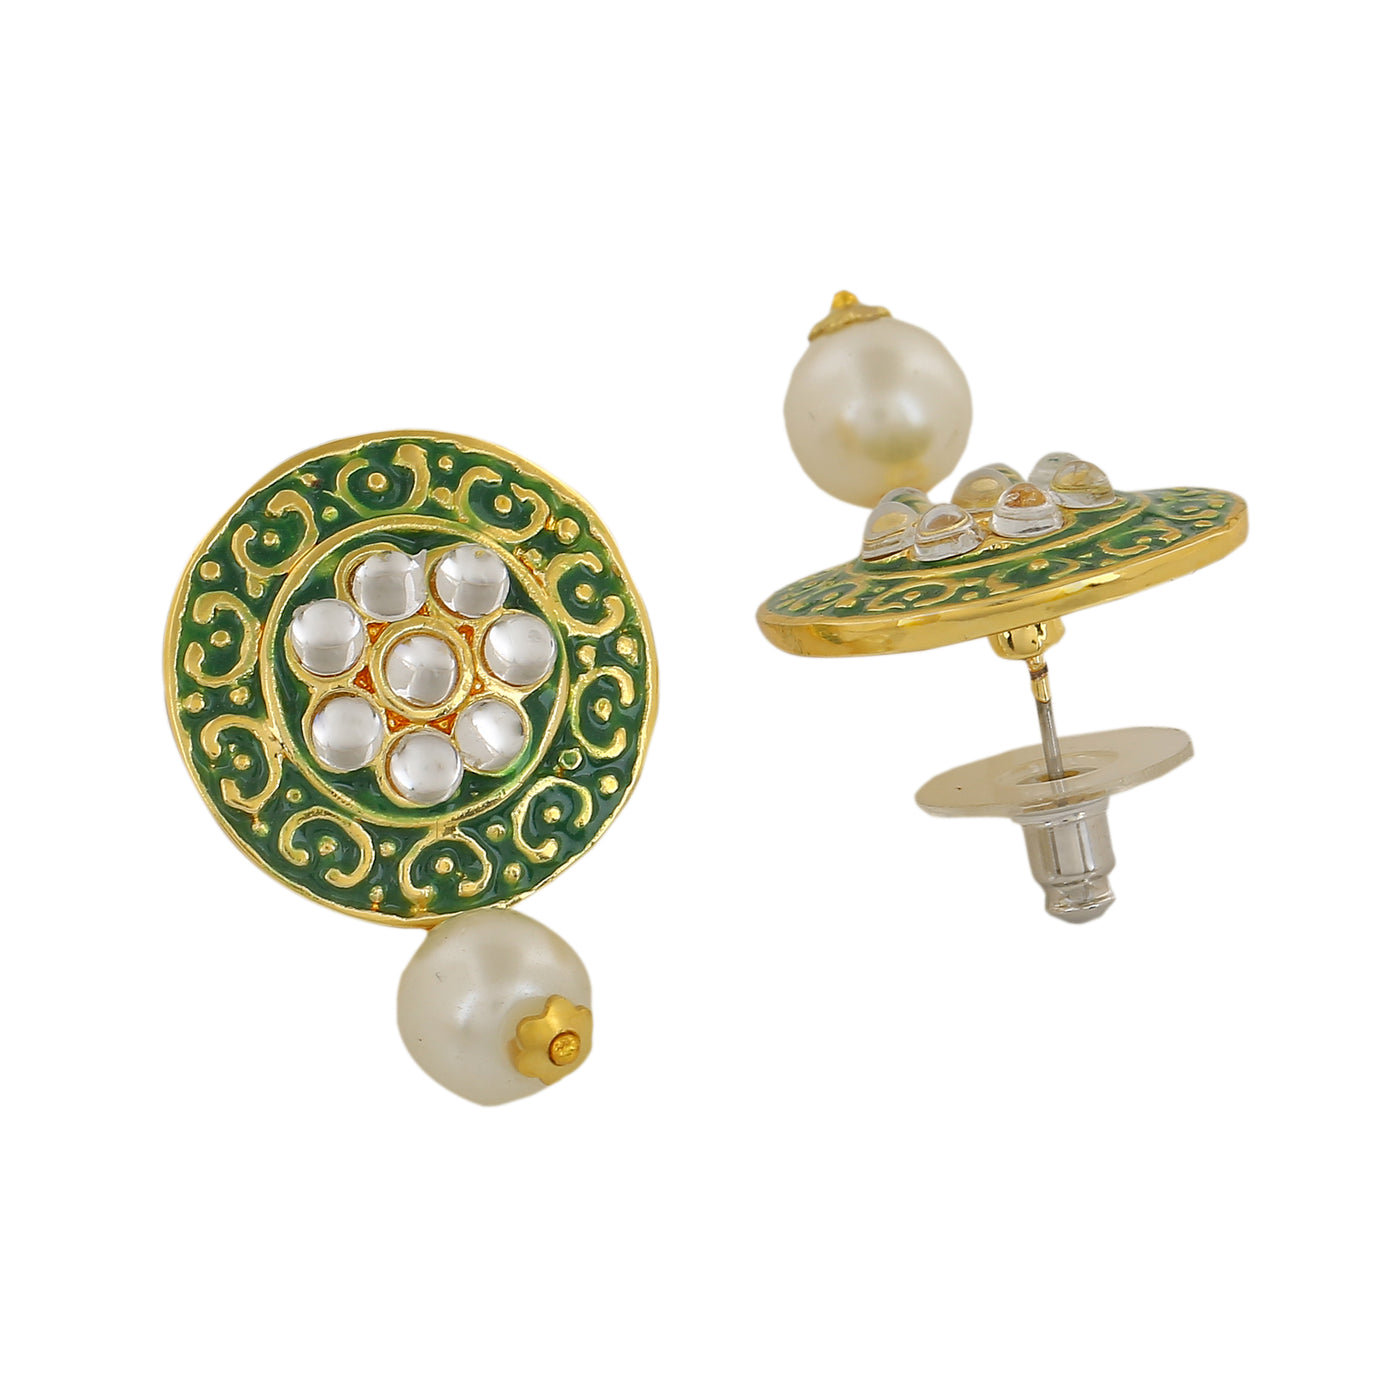 Estele Gold Plated Floral Meenakari Kundan Earring with Pearls for Women